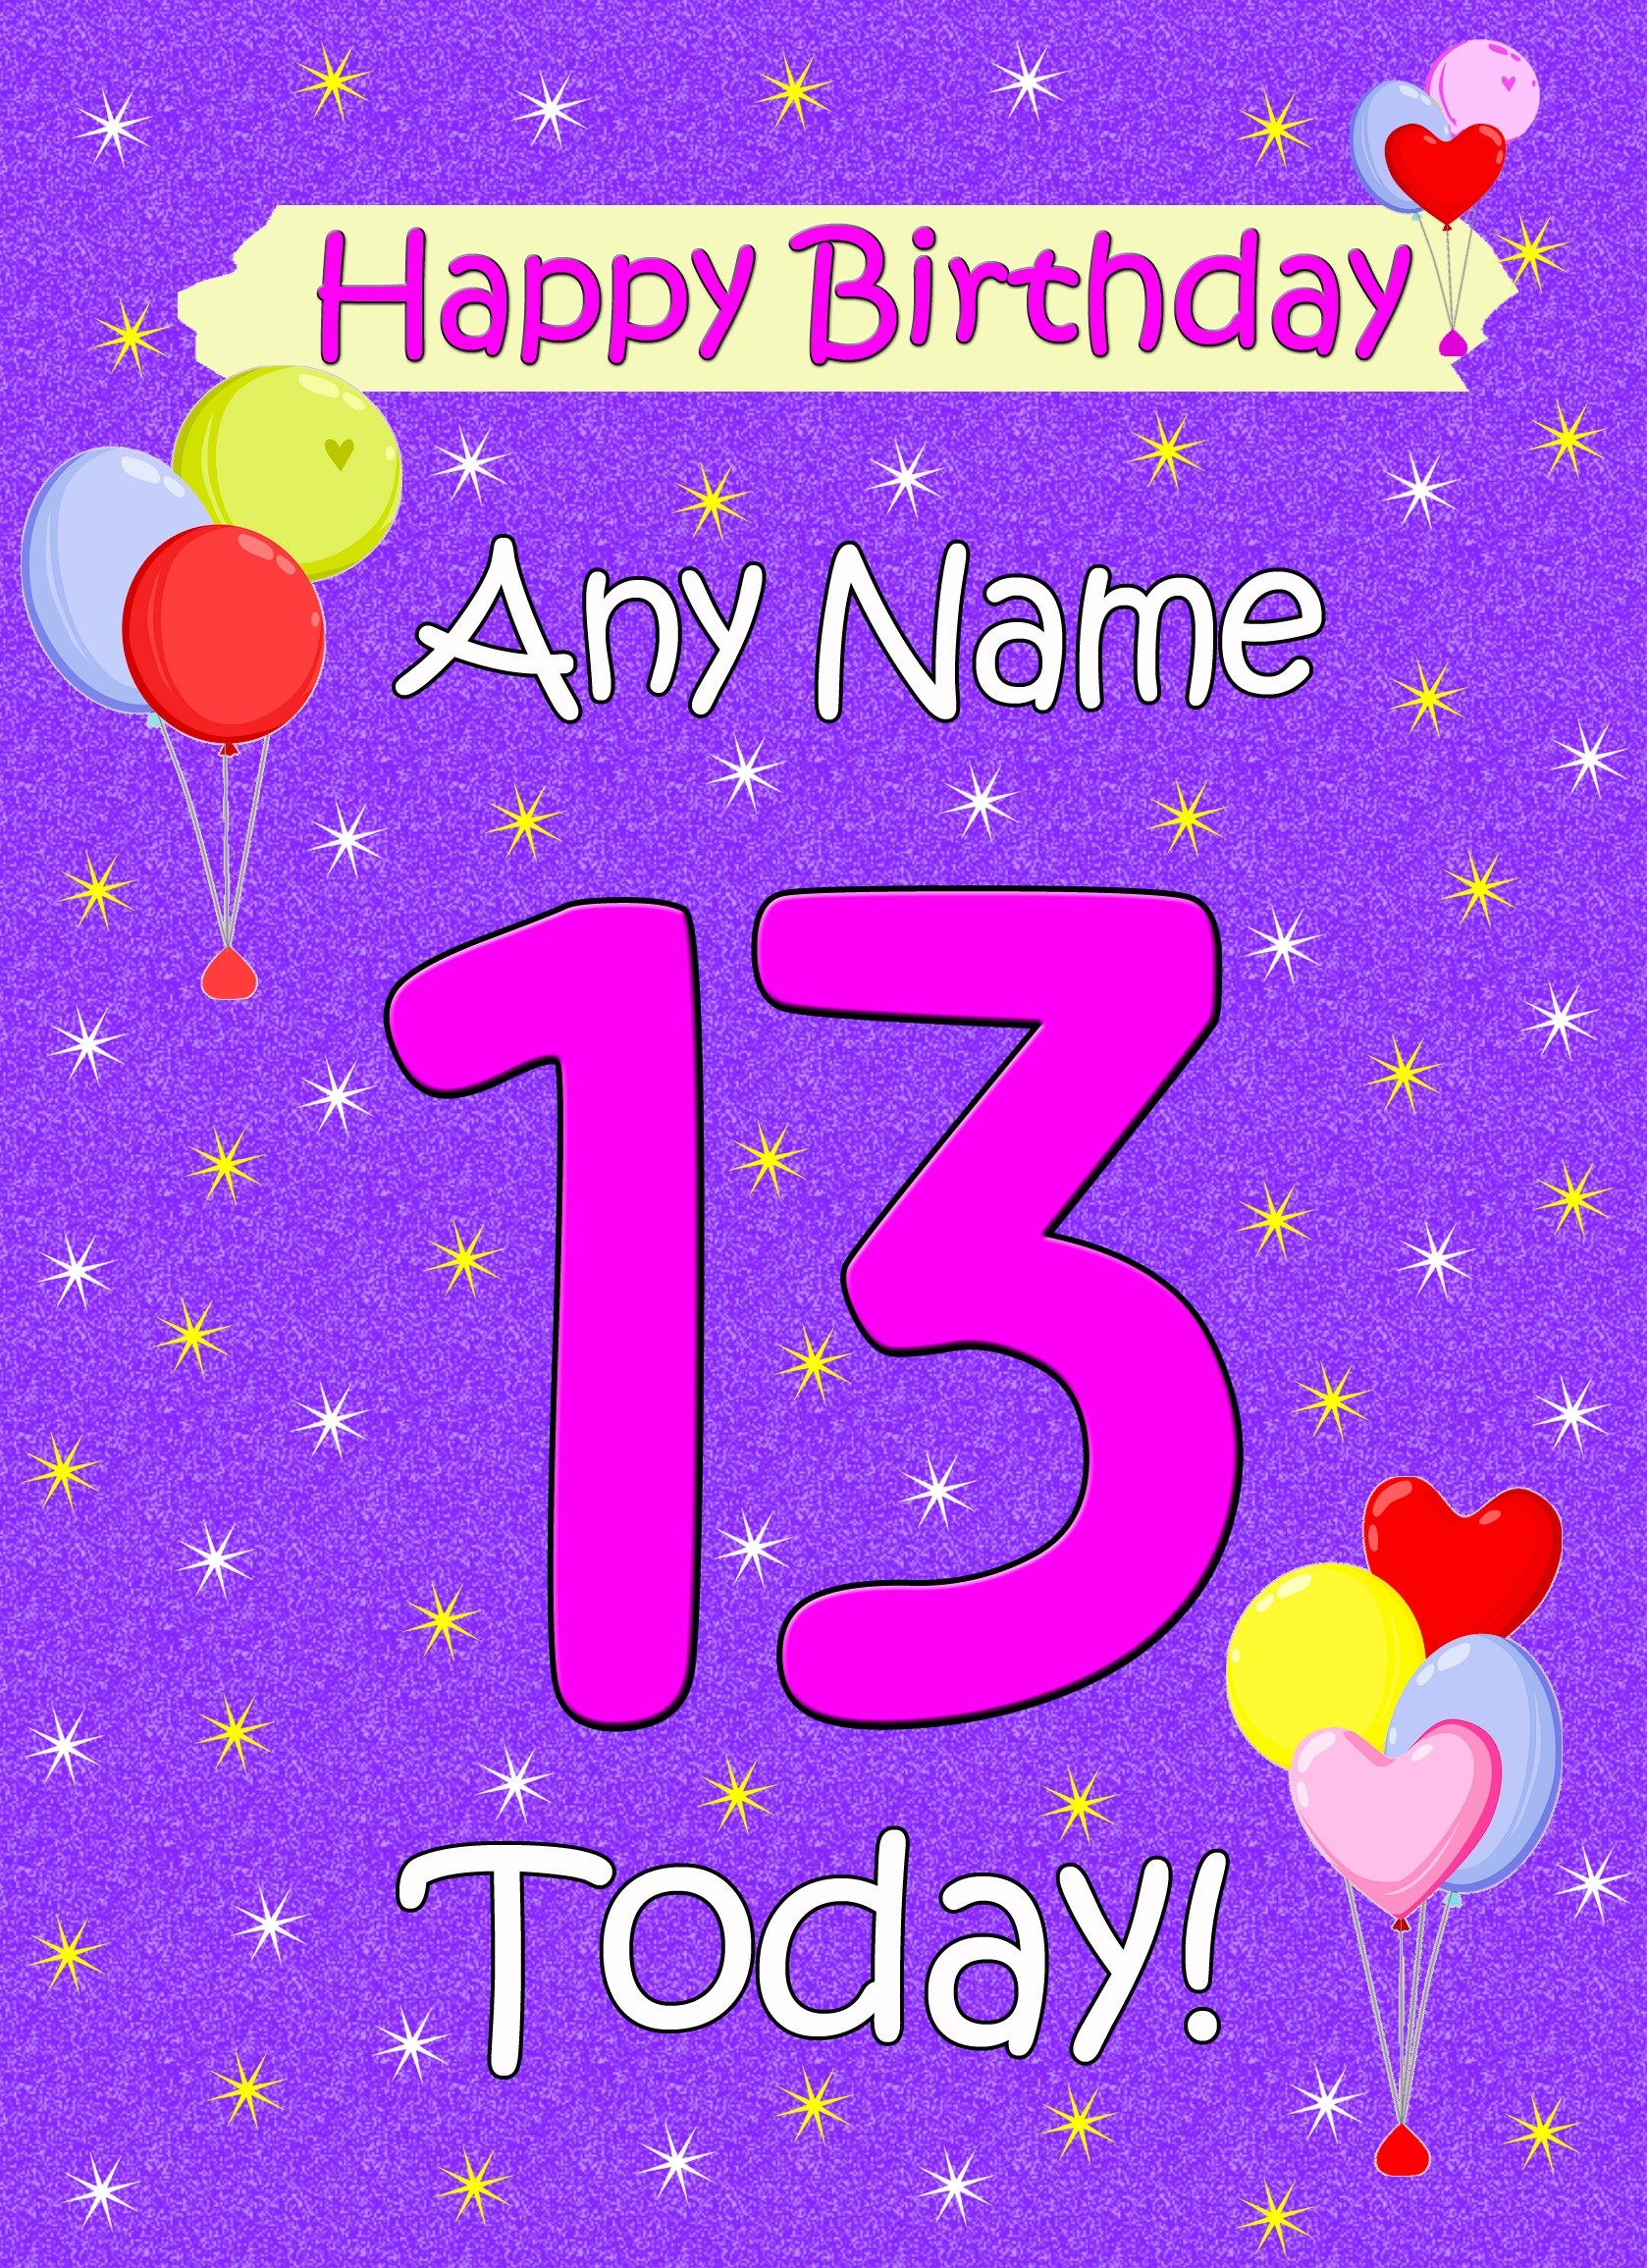 Personalised 13th Birthday Card (Lilac)